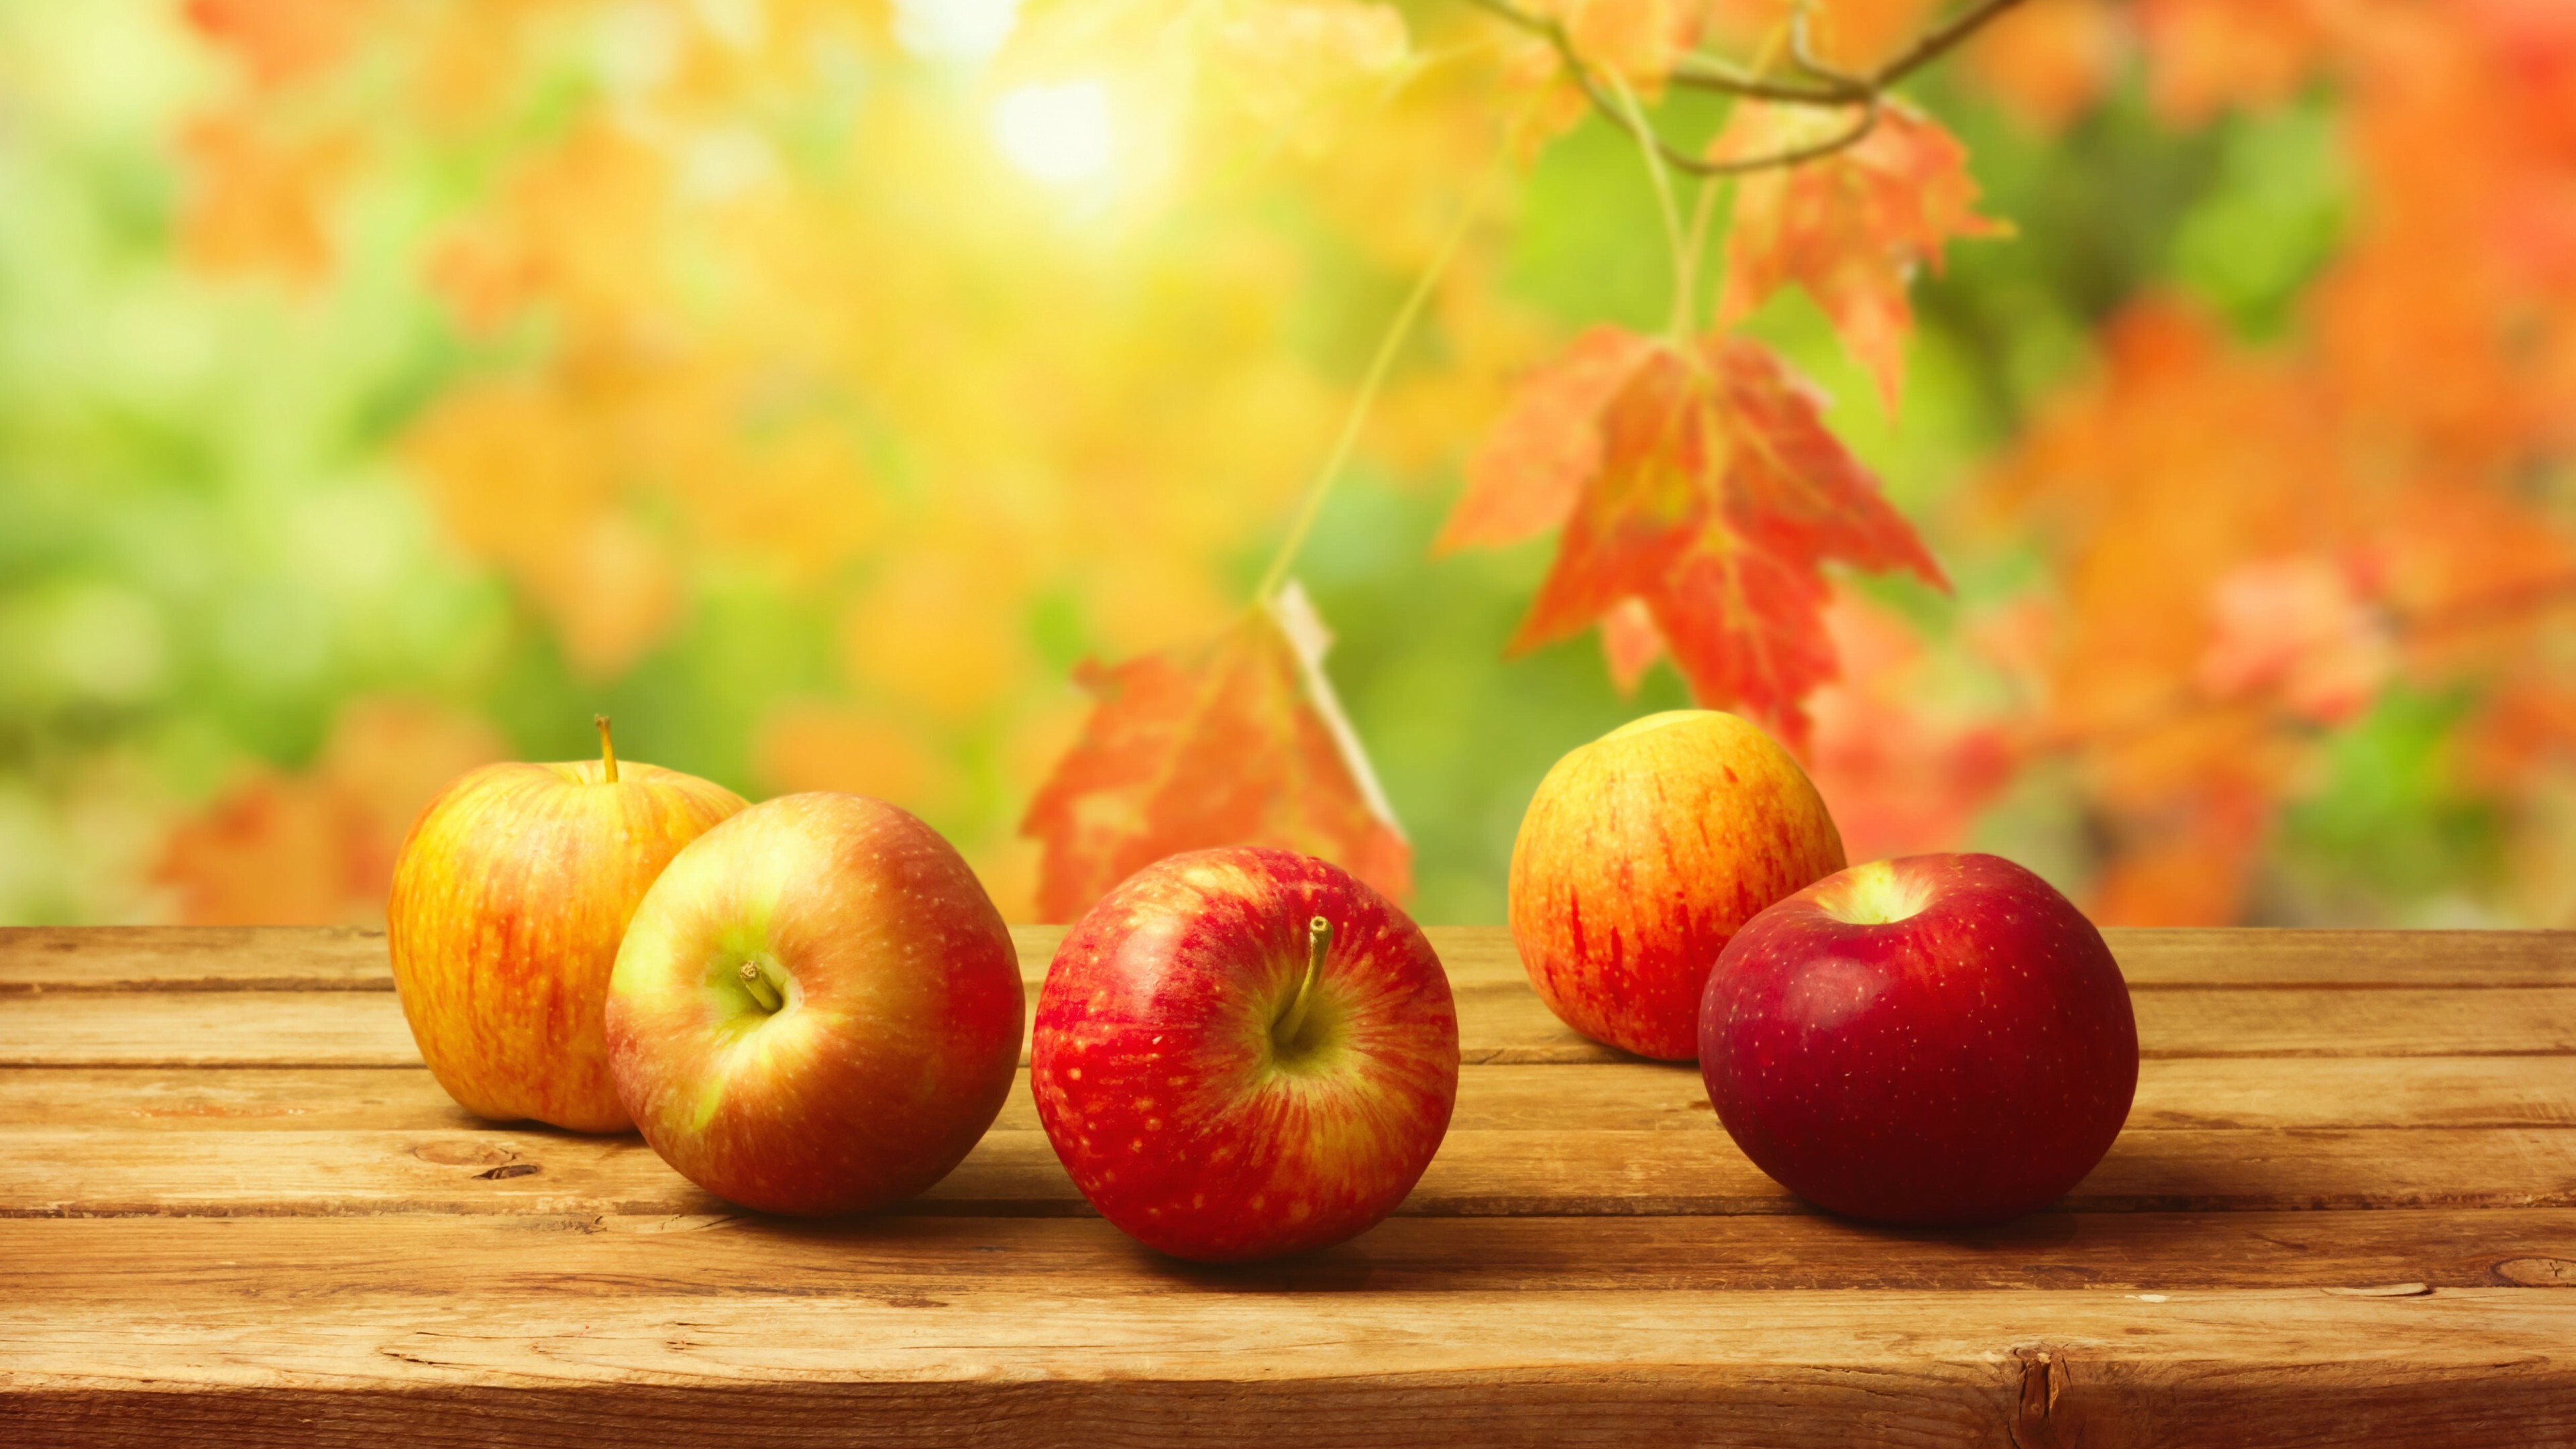 Fruit: Apples, A rich source of dietary phytochemicals such as flavonoids. 3840x2160 4K Wallpaper.